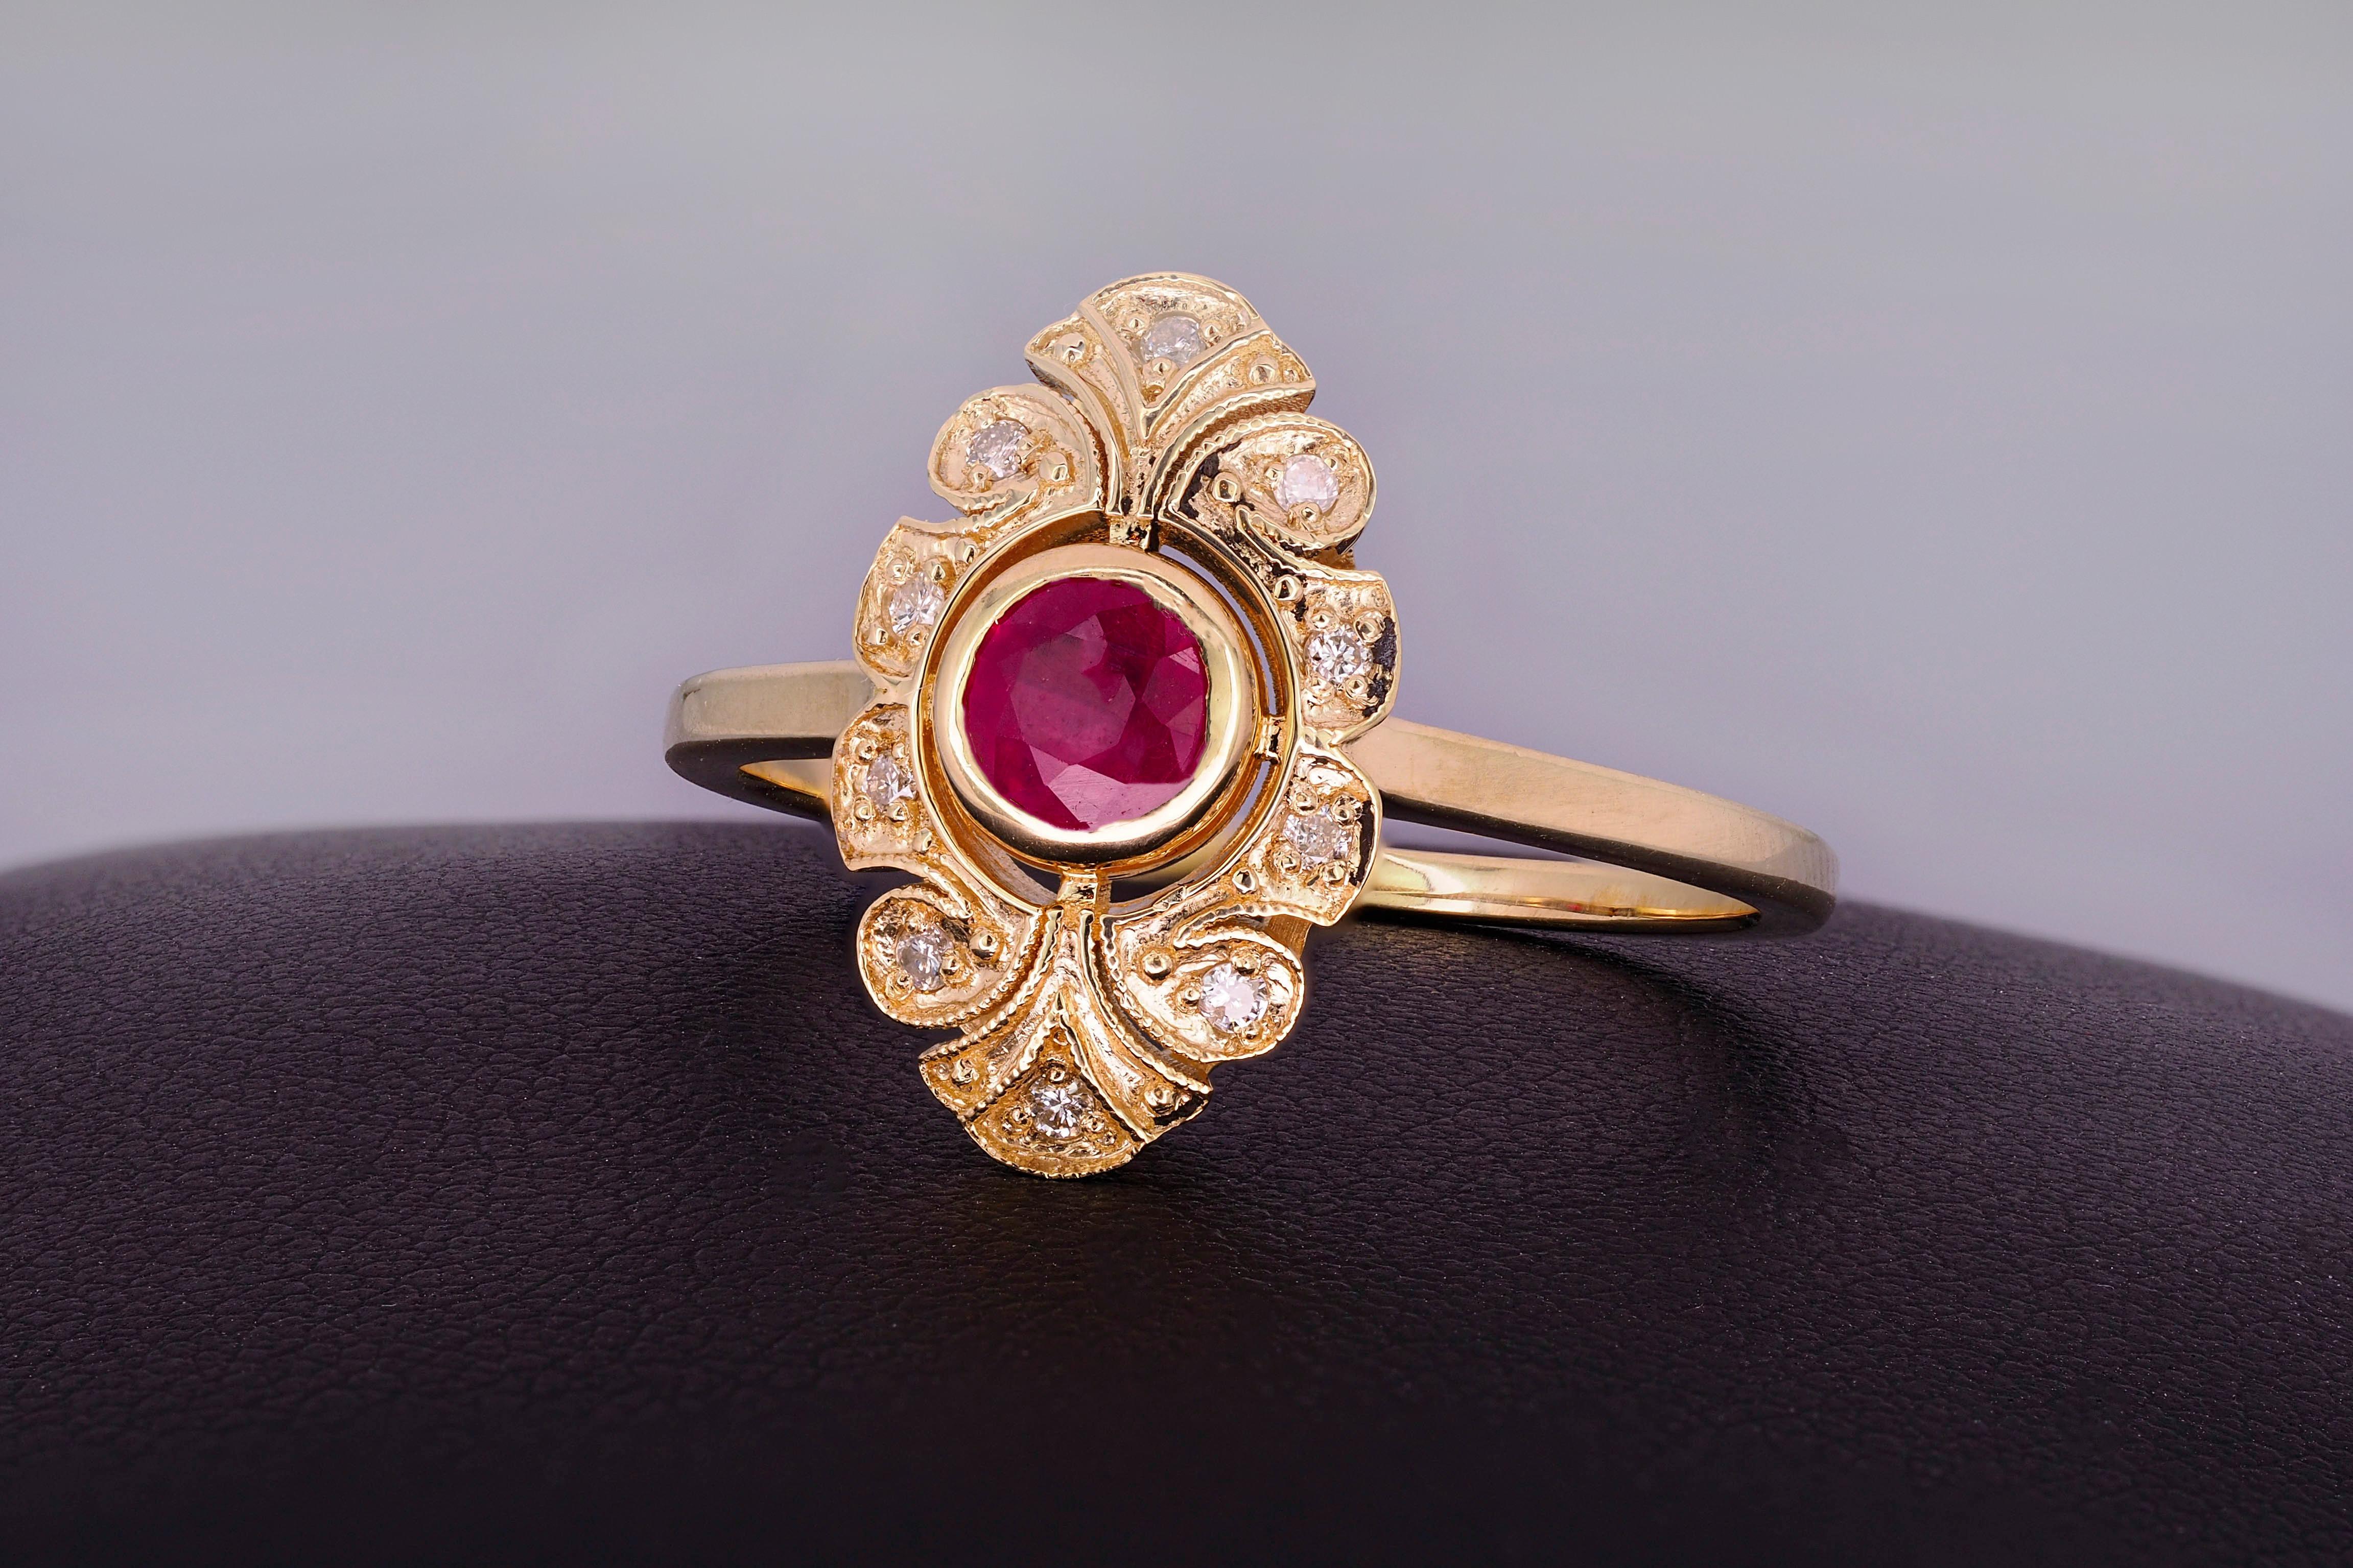 14 Karat Gold Ring with Ruby and Diamonds, Vintage Inspired Ring 2